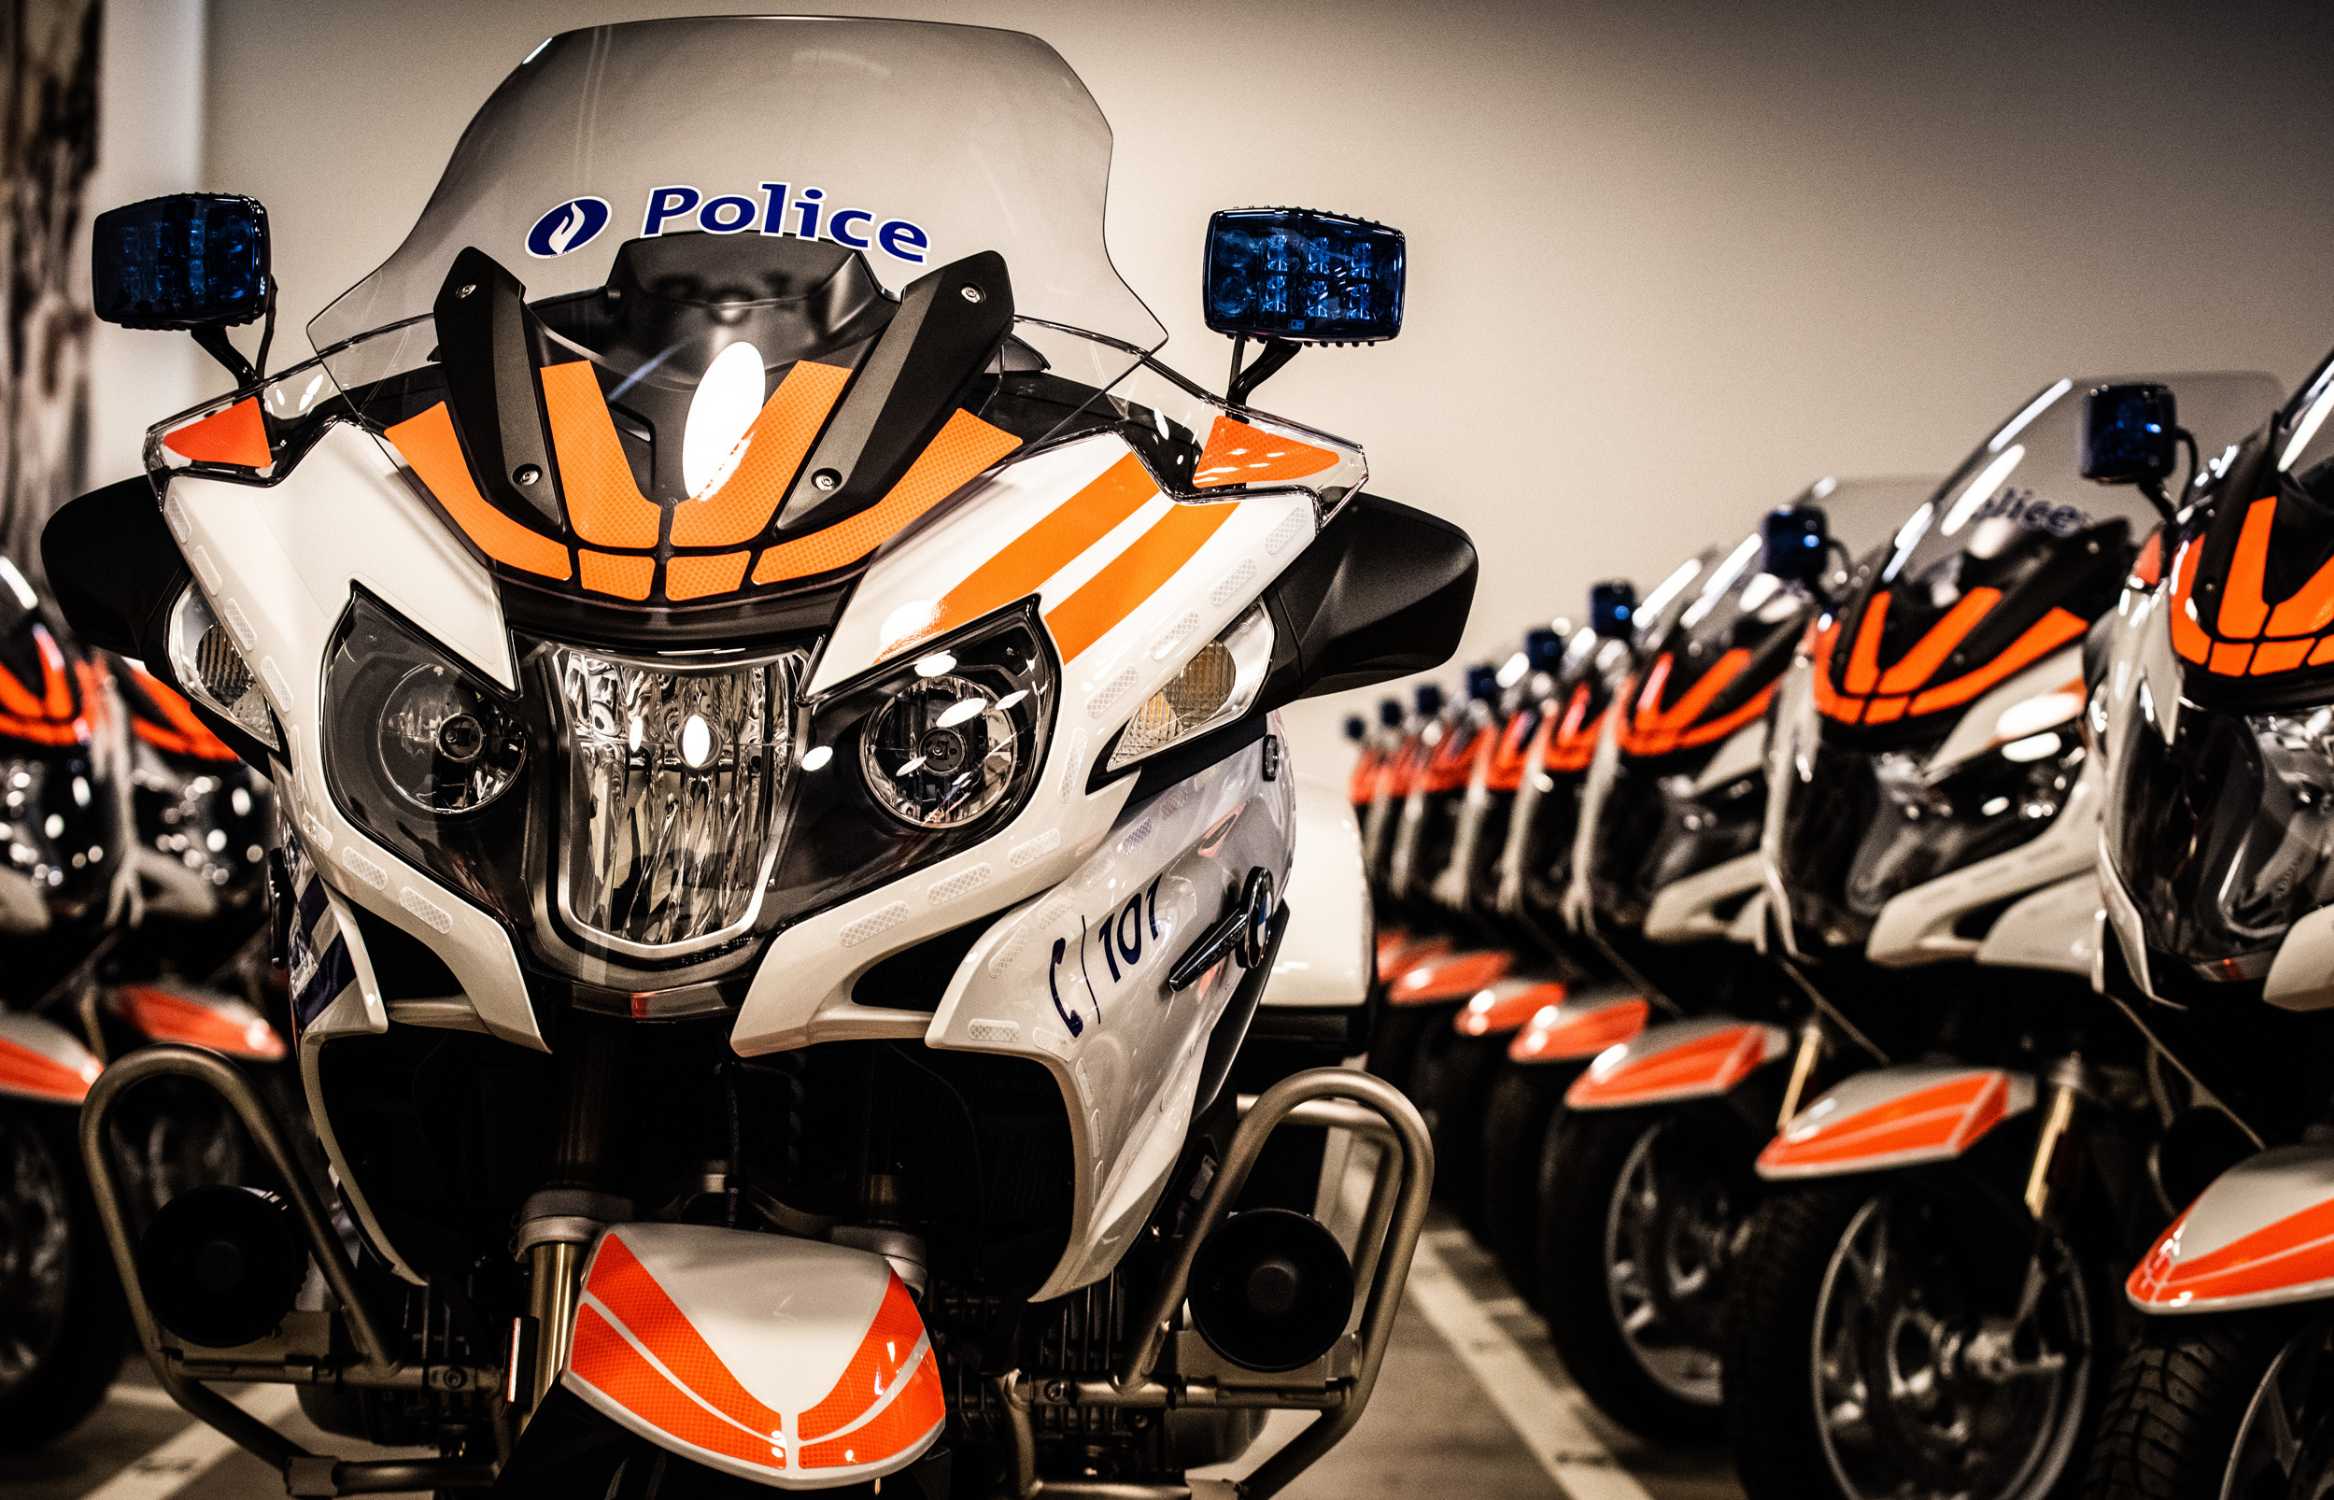 BMW R 1200 RT for the Belgian Federal Police (10/2018)